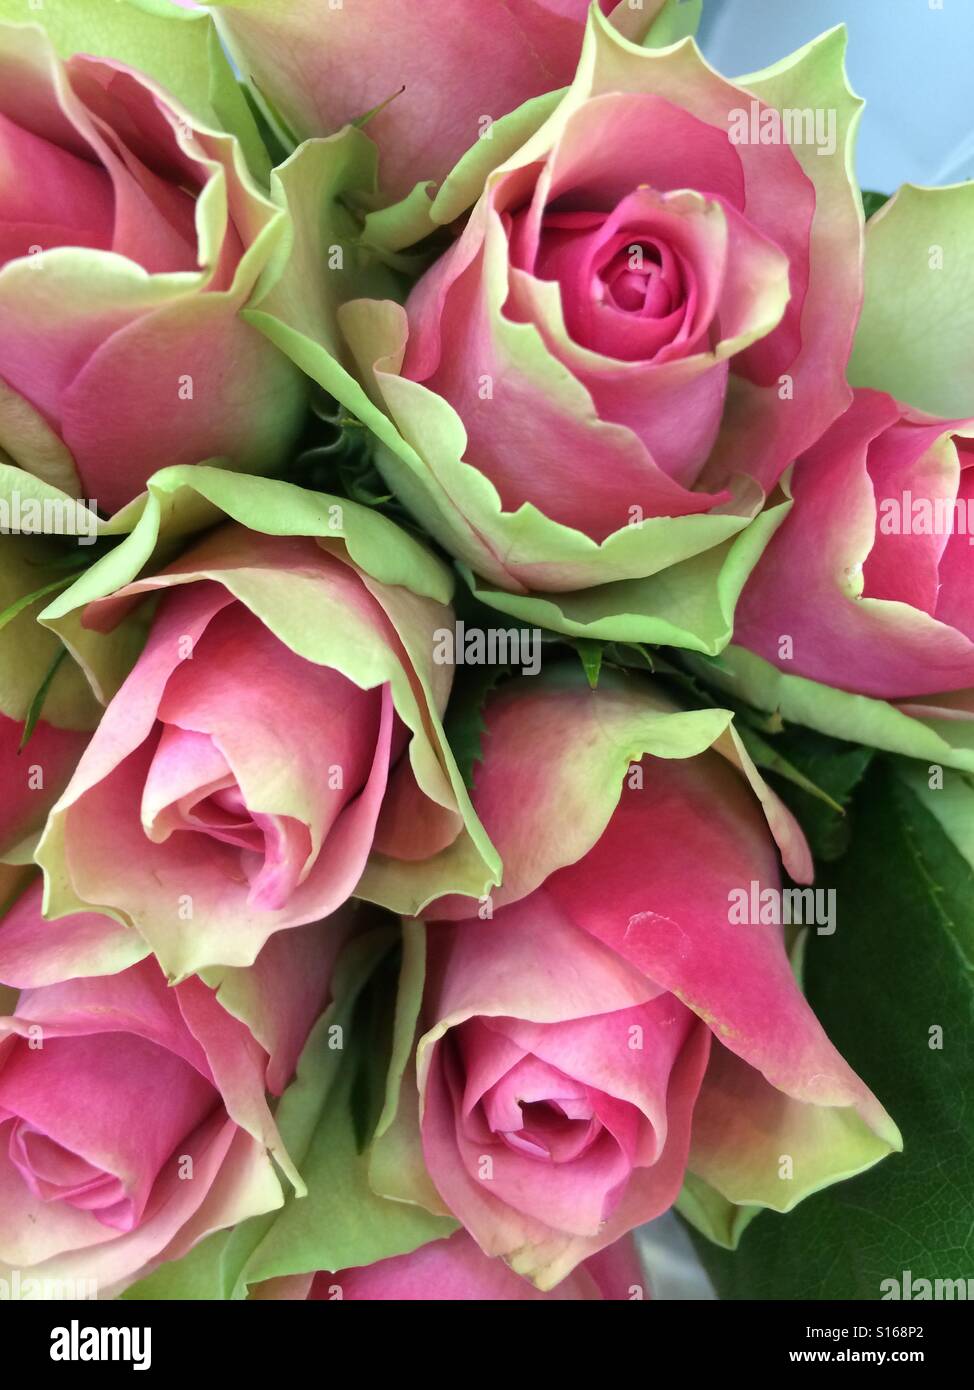 Pink and green roses Stock Photo - Alamy